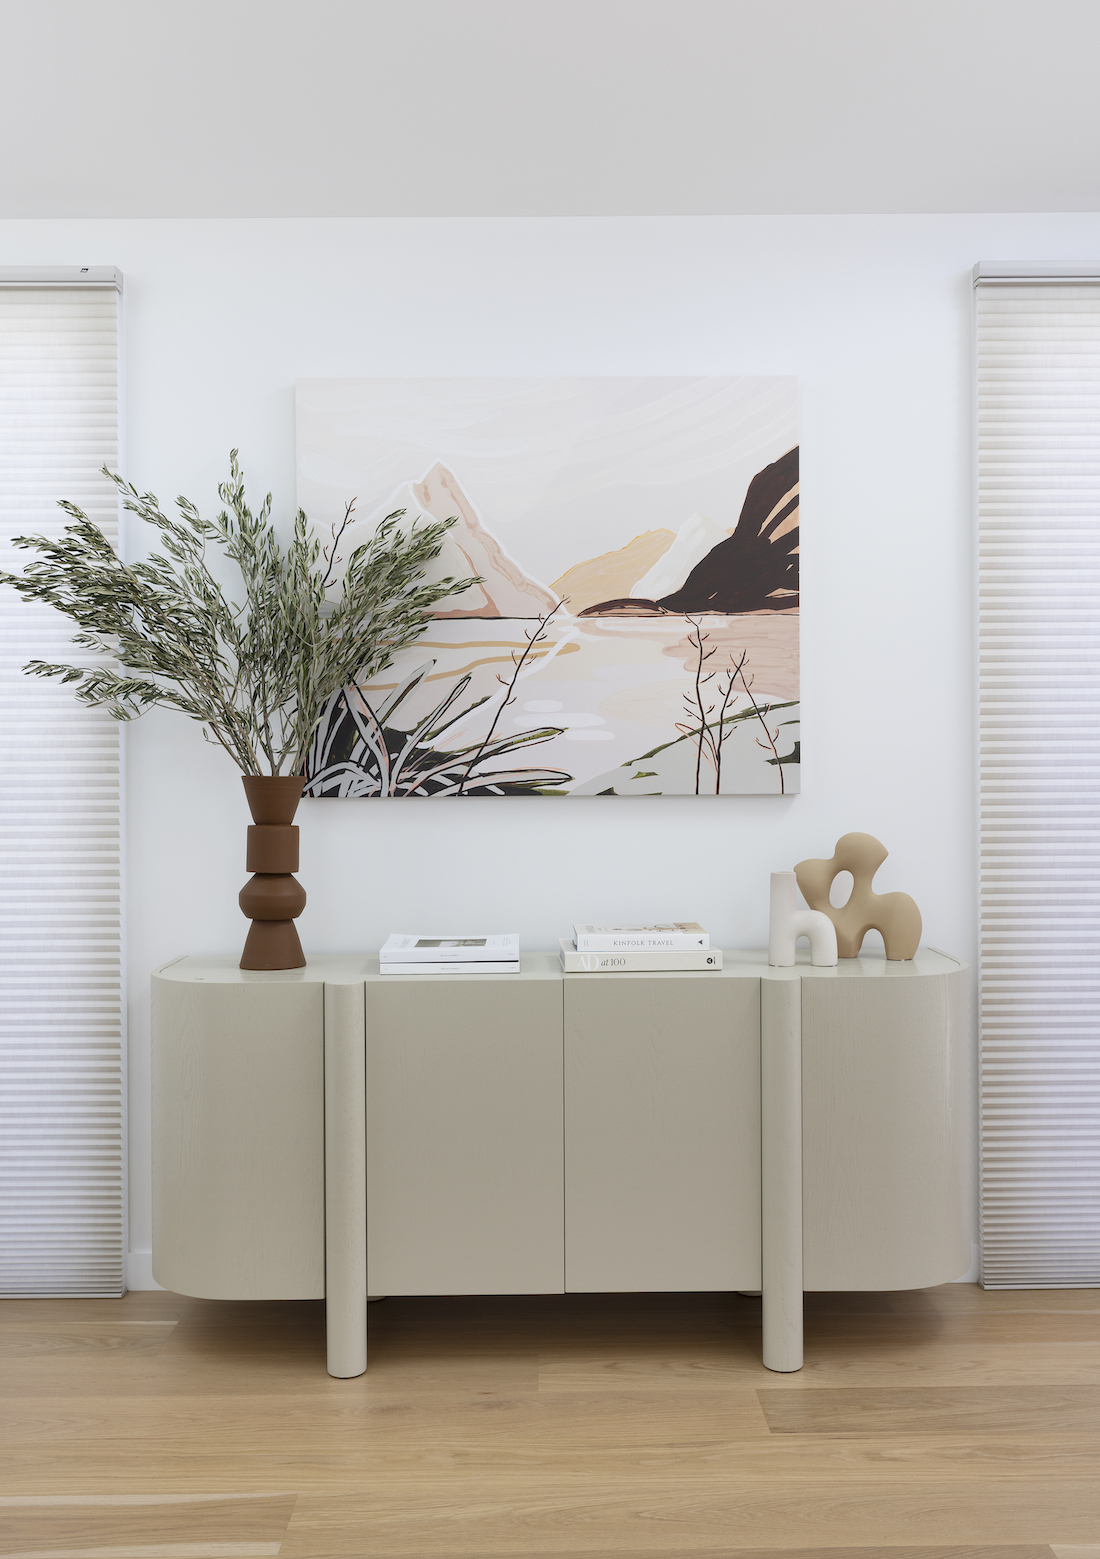 Sideboard with statement art piece